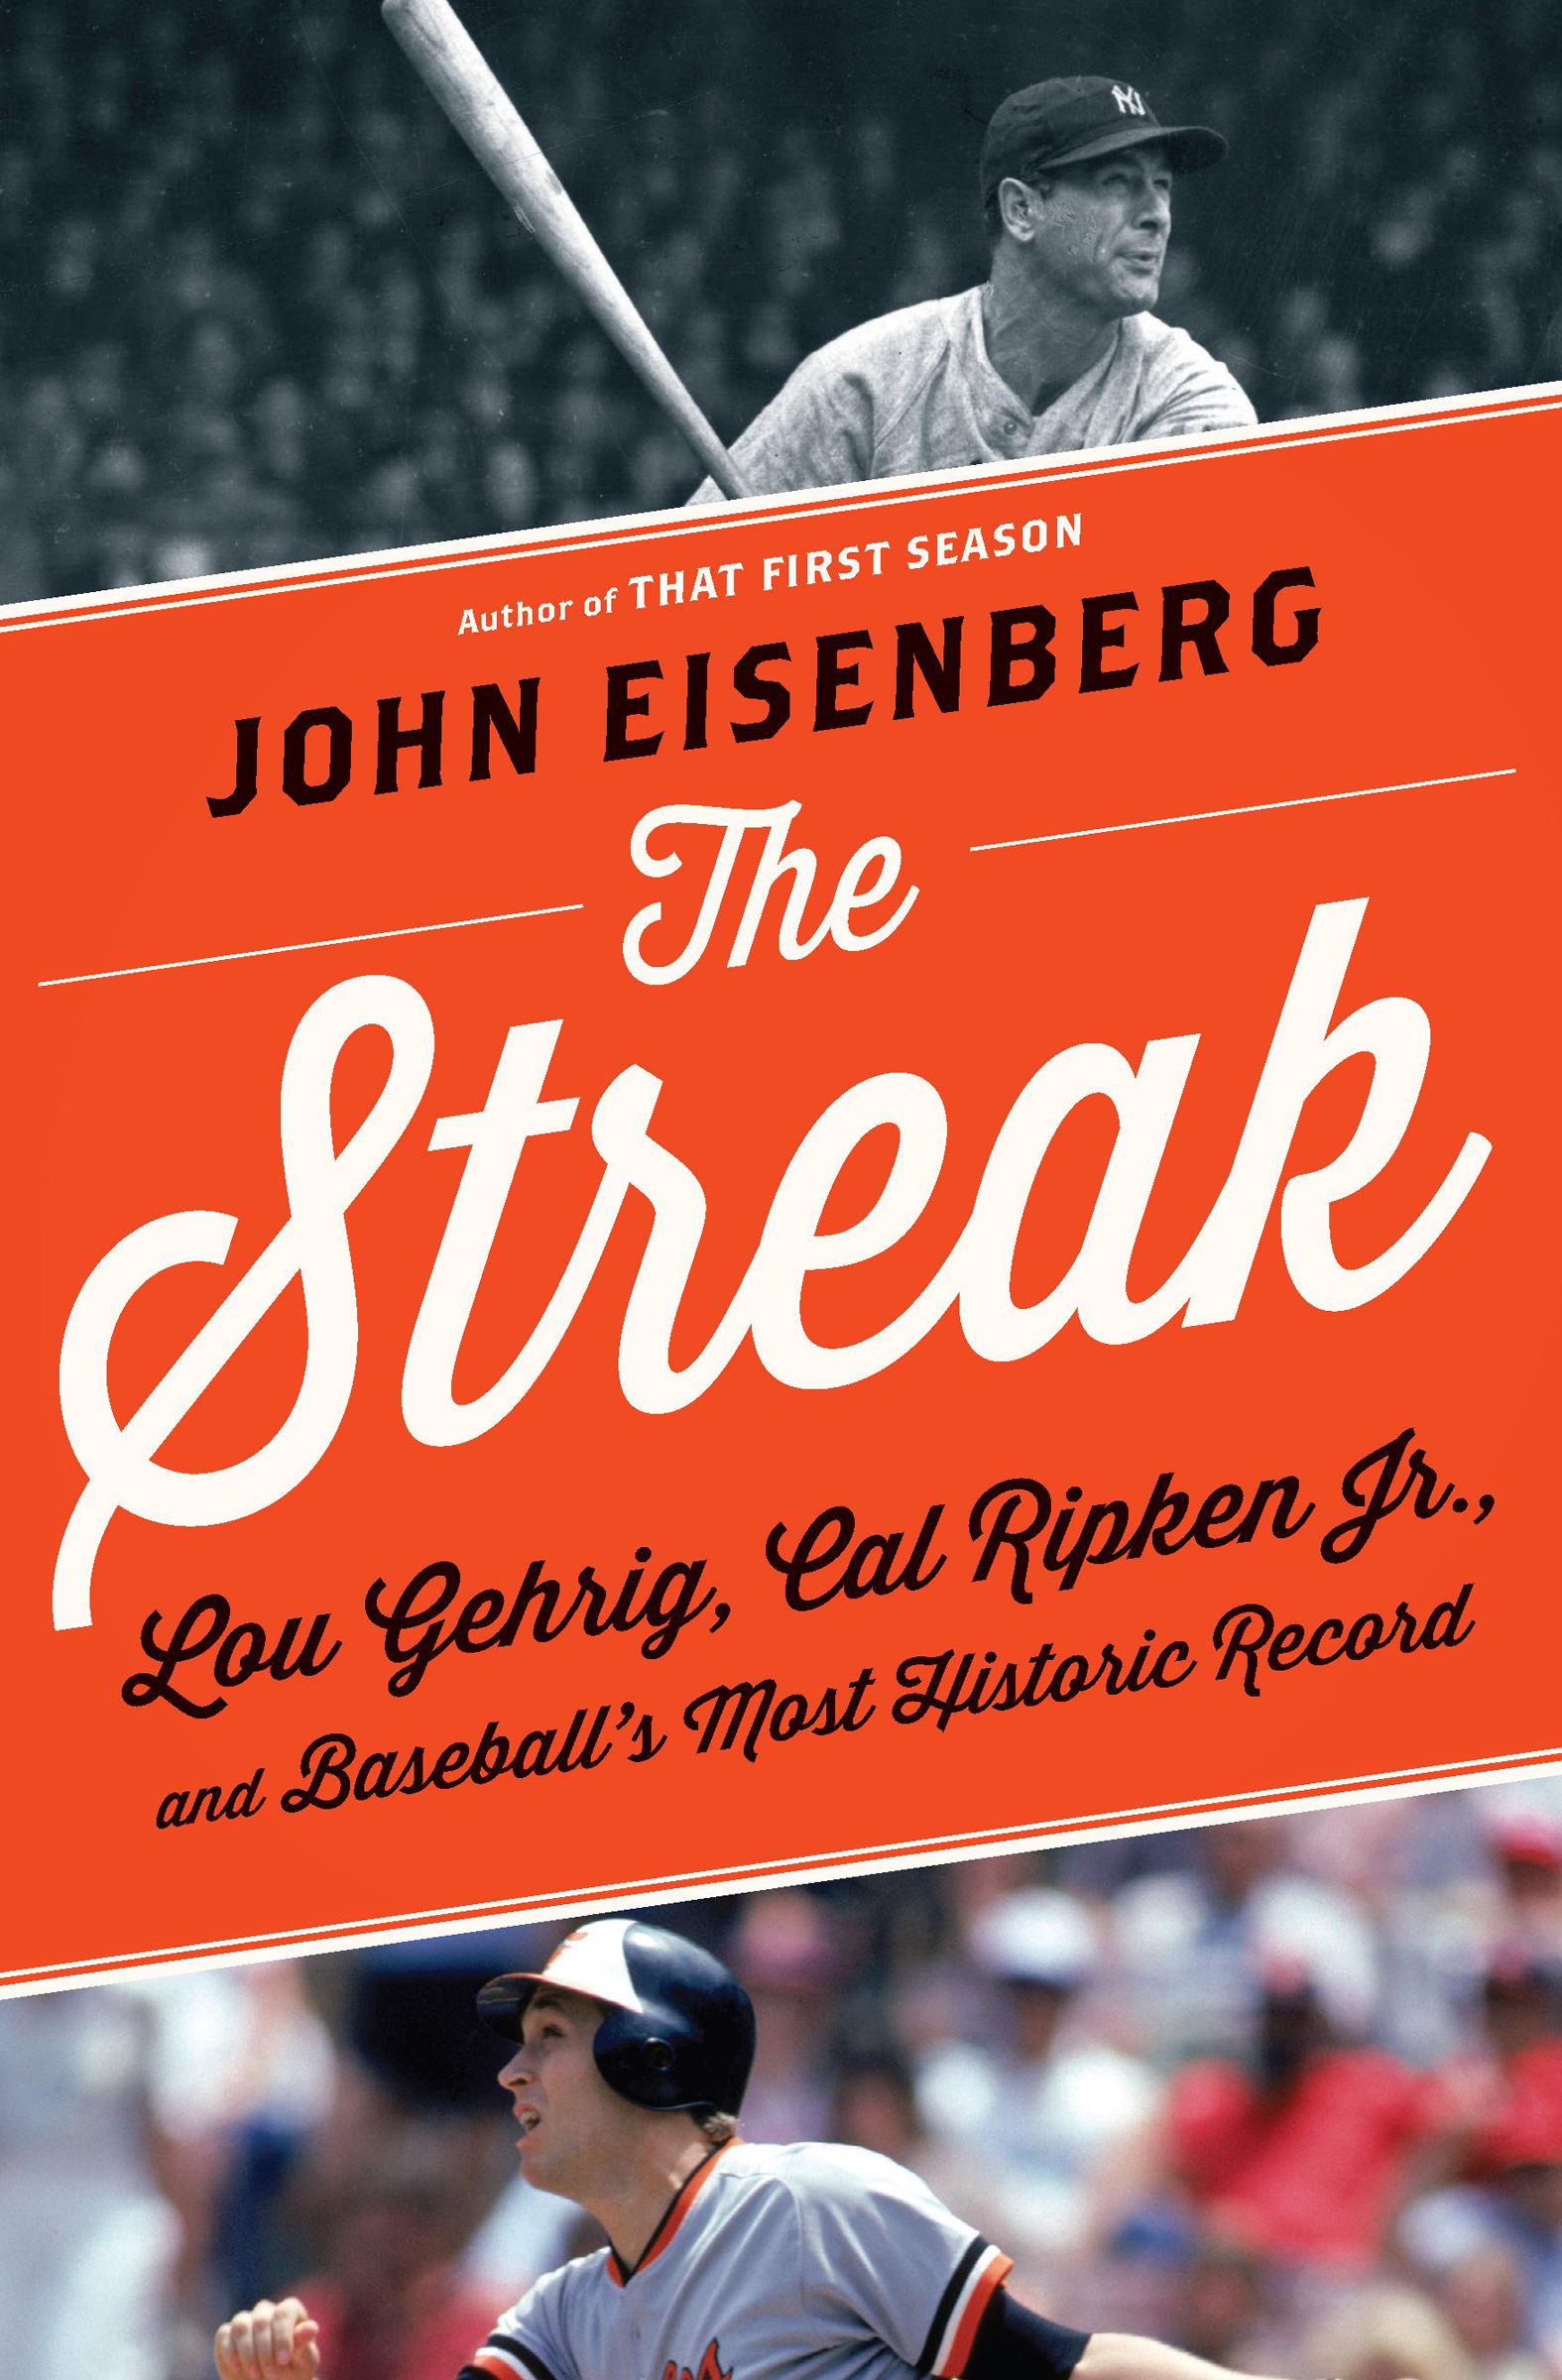 The streak Lou Gehrig, Cal Ripken Jr., and baseball's most historic record cover image